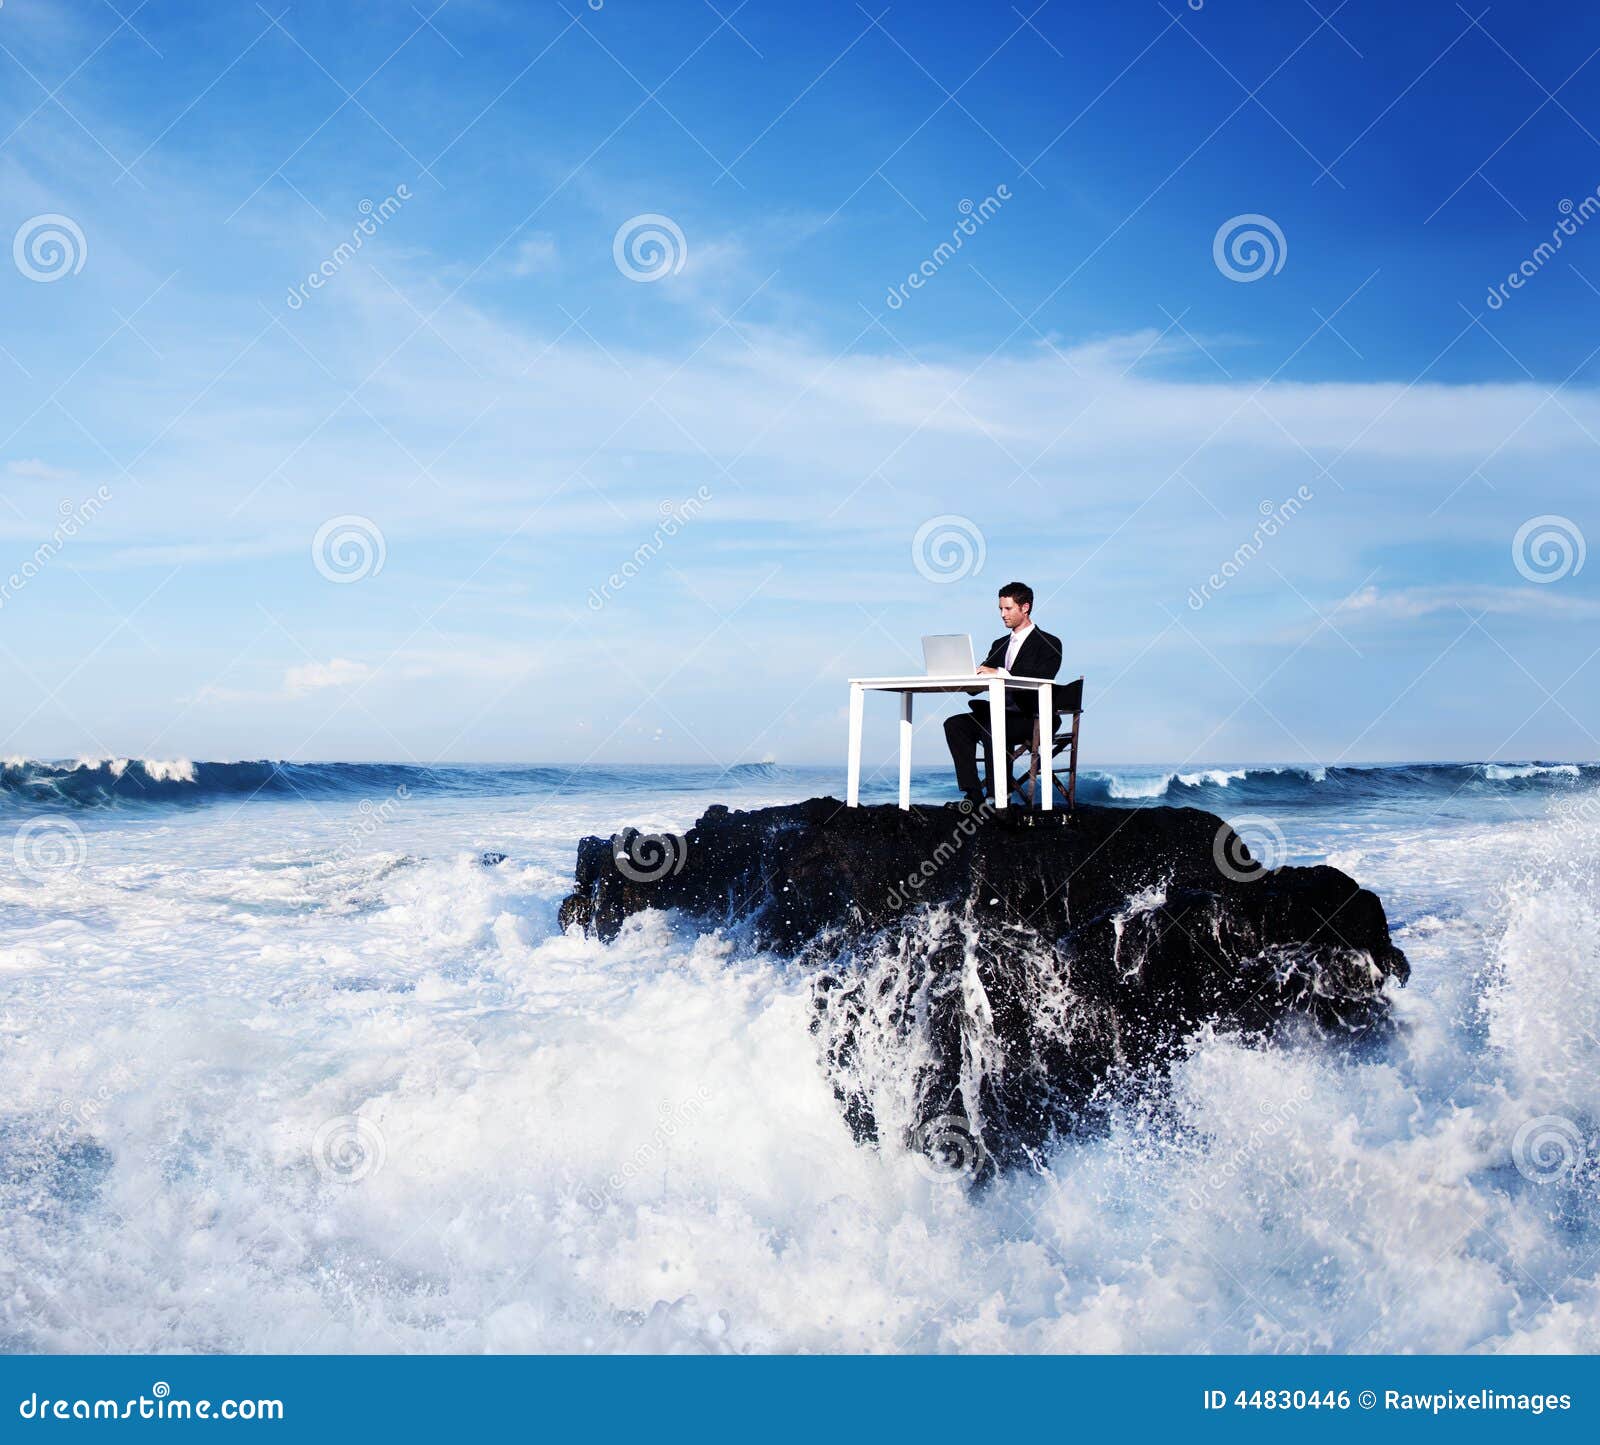 lone business man working on a remote rock